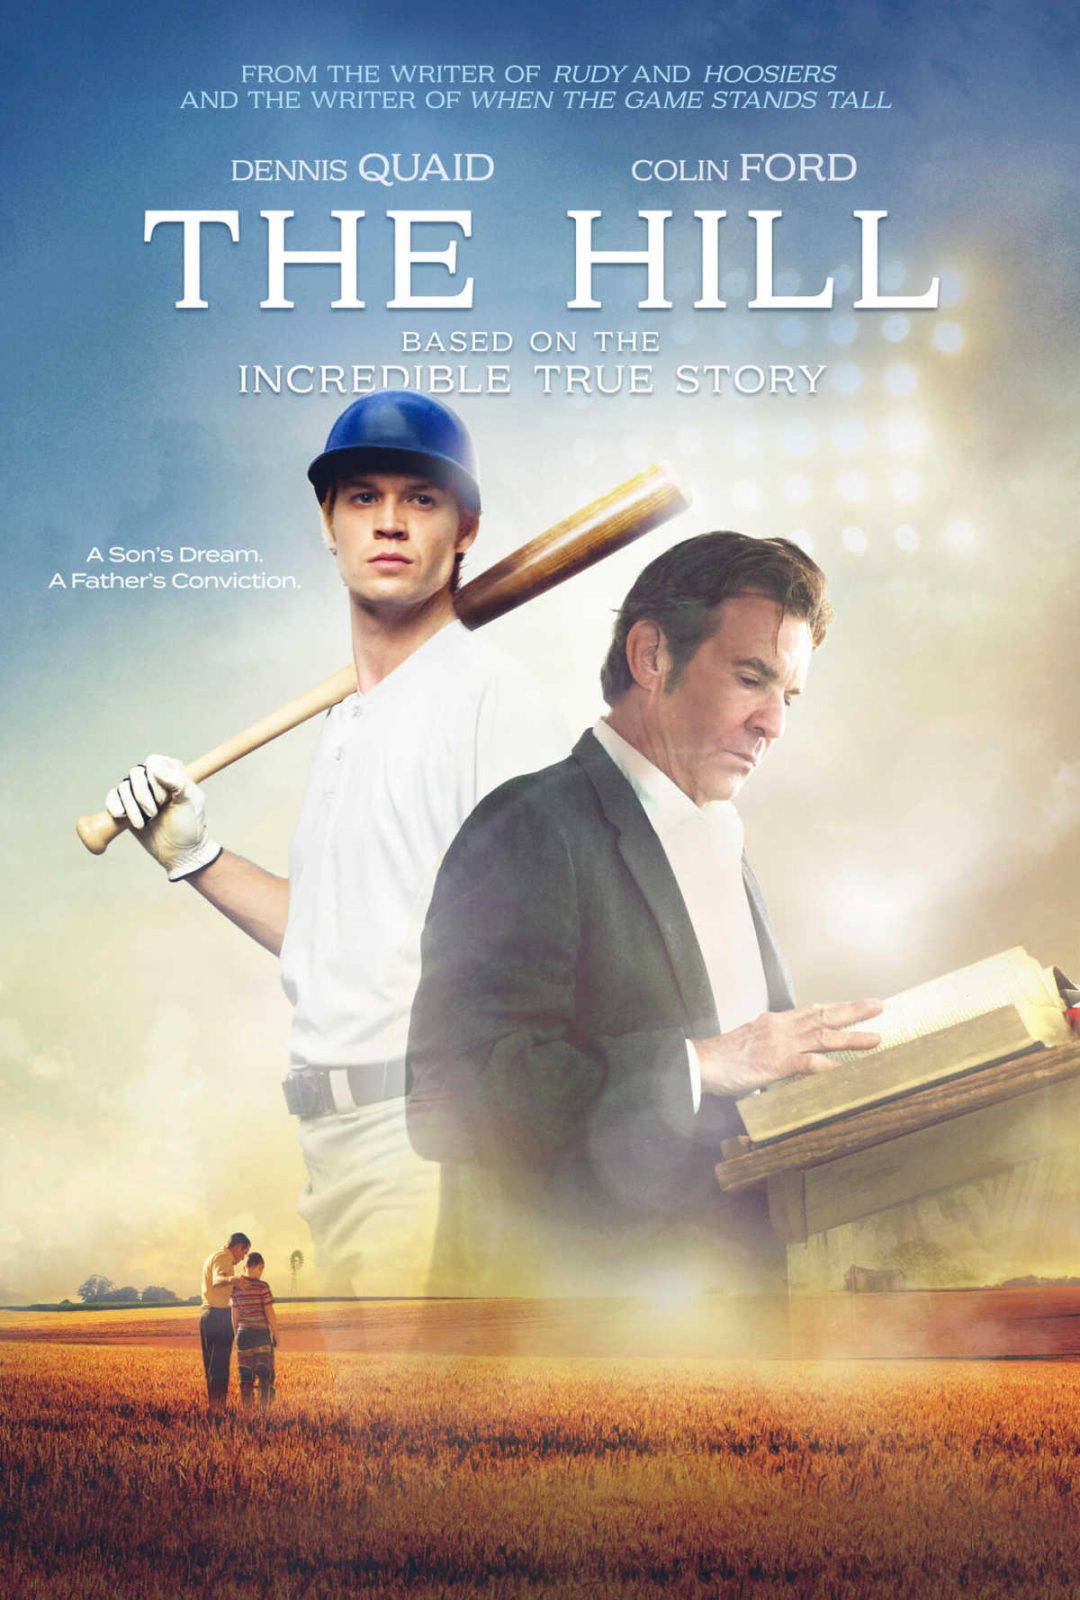 The Hill is a new movie that tells the inspiring true story of Rickey Hill, a young man who overcame incredible challenges to achieve his dream of playing Major League Baseball.